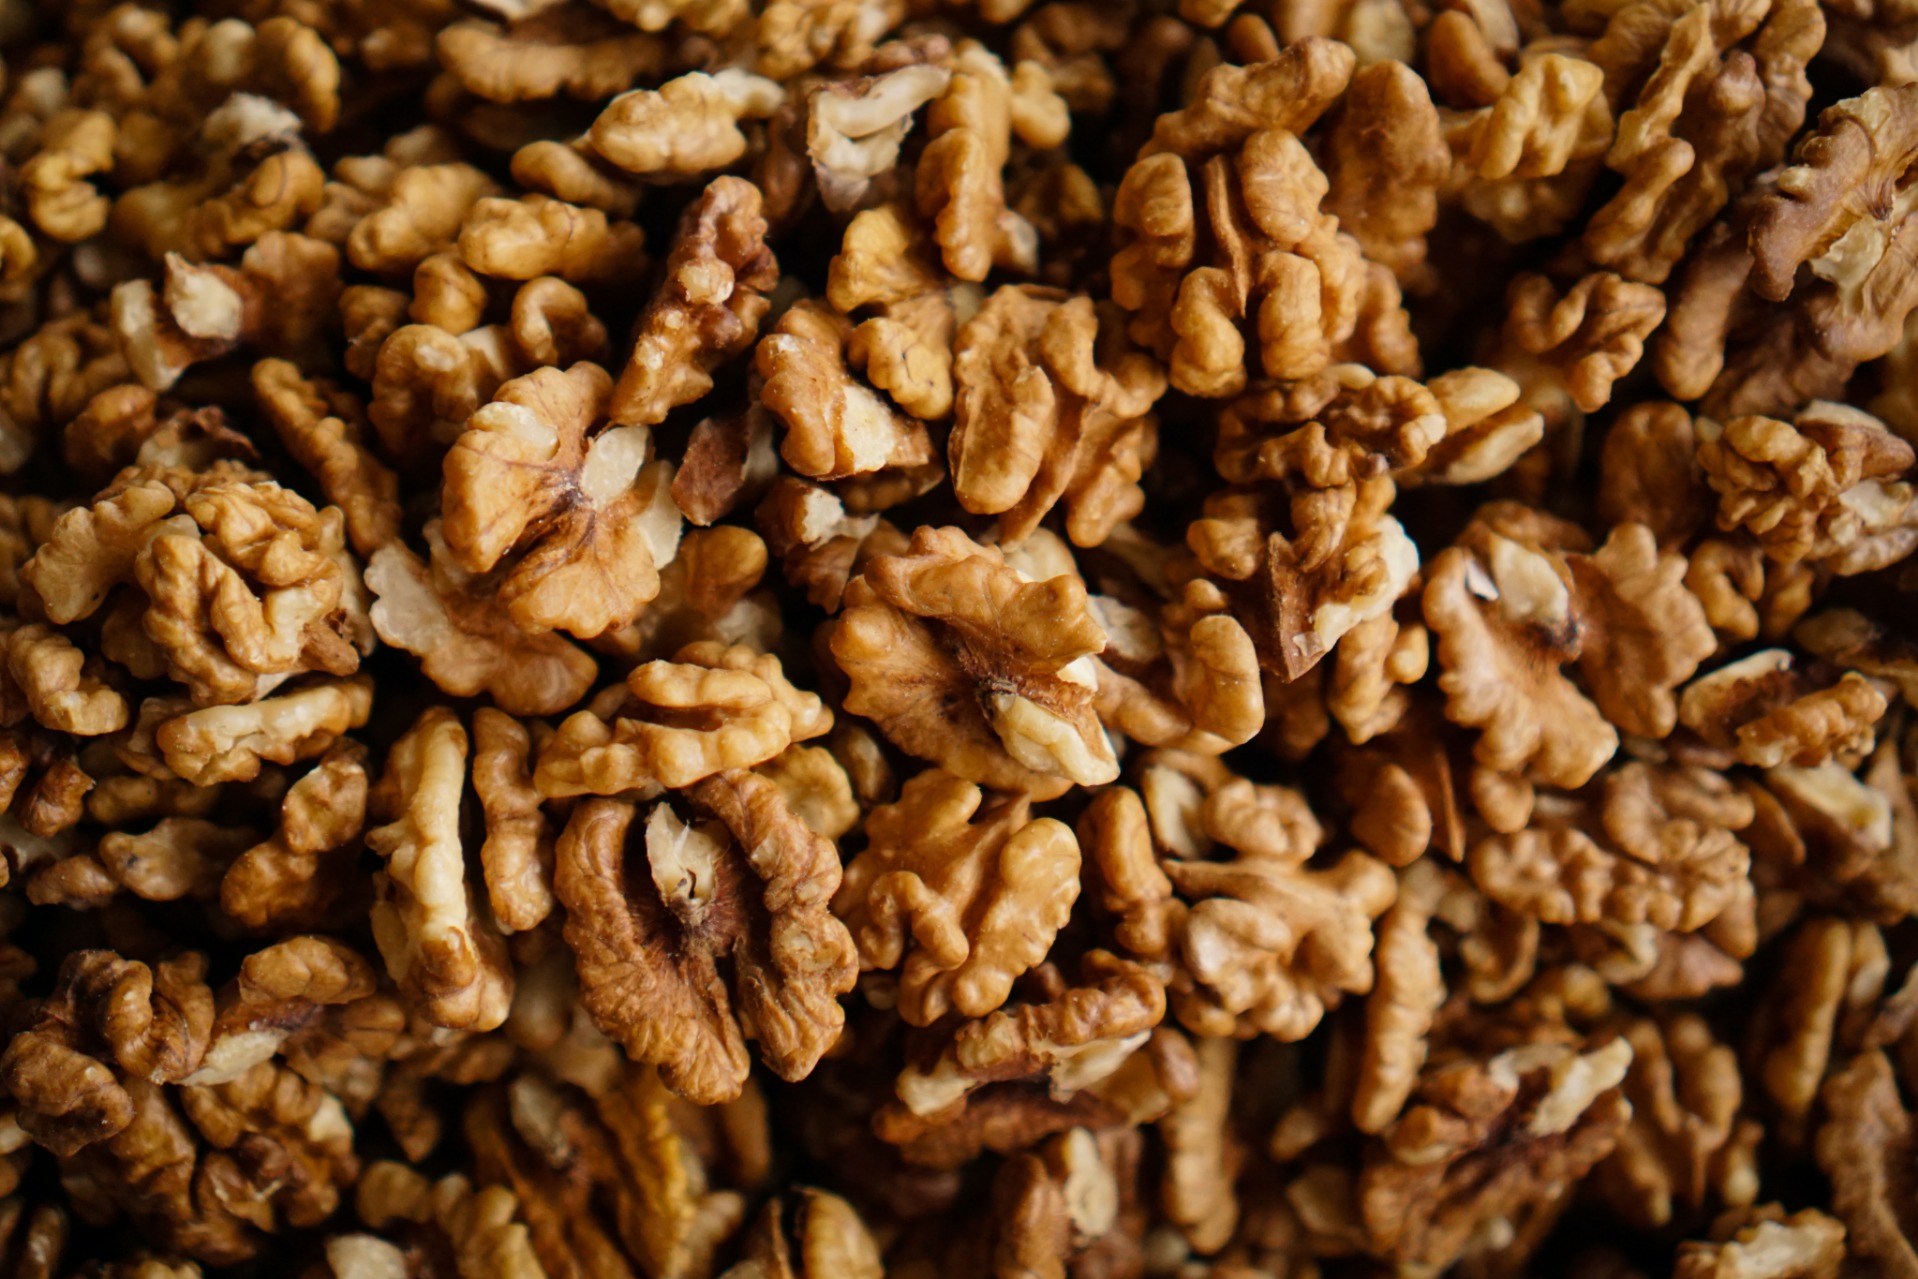 Shelled Walnuts ready to be eaten as a Superfood snack